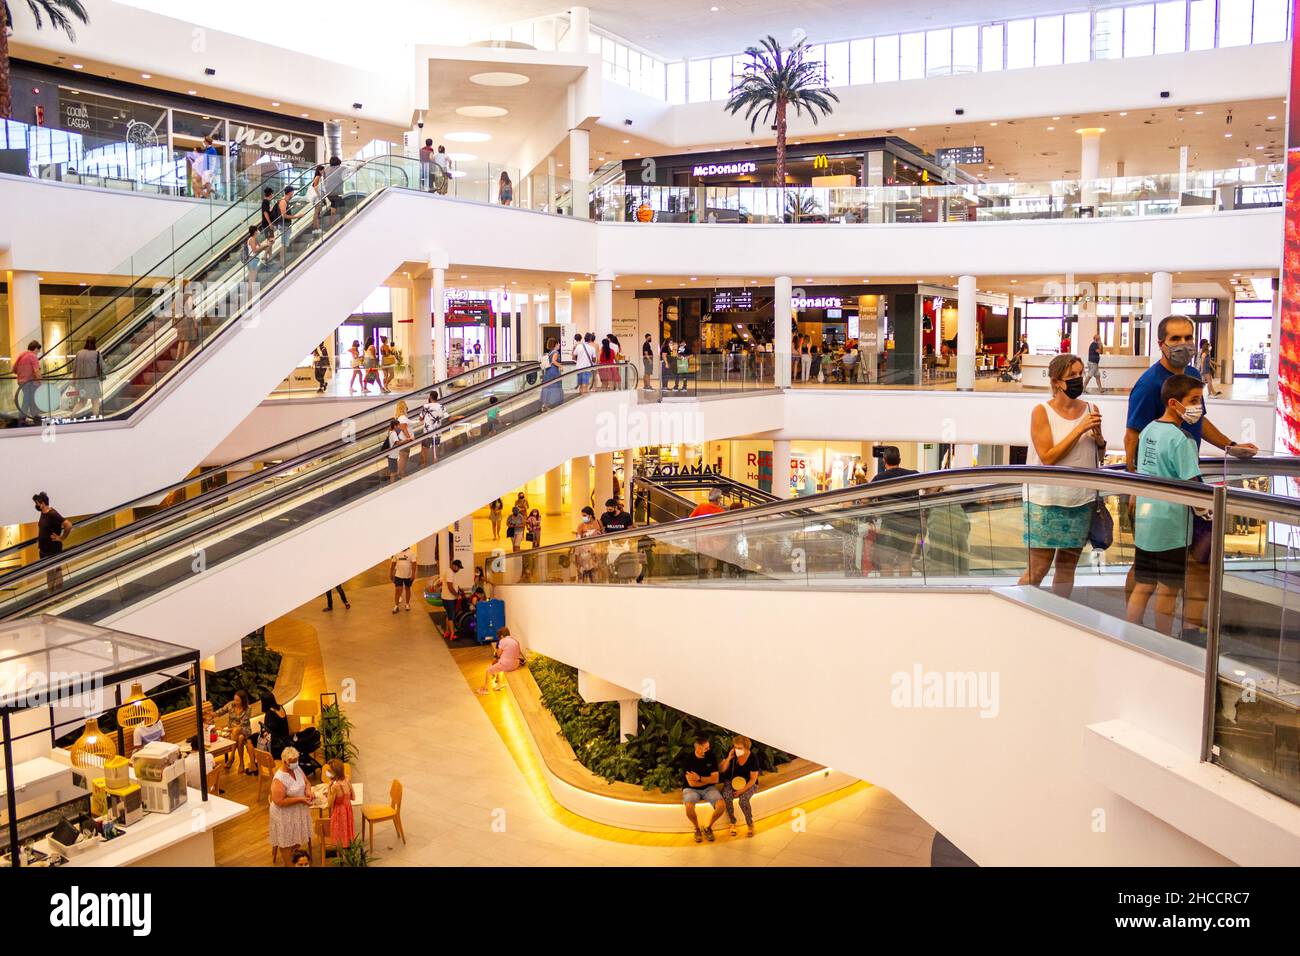 Valencia, Spain; 6th july 2021: El Saler Shopping Center Gallery. People took shelter inside the malls due to the high temperatures outside. Stock Photo